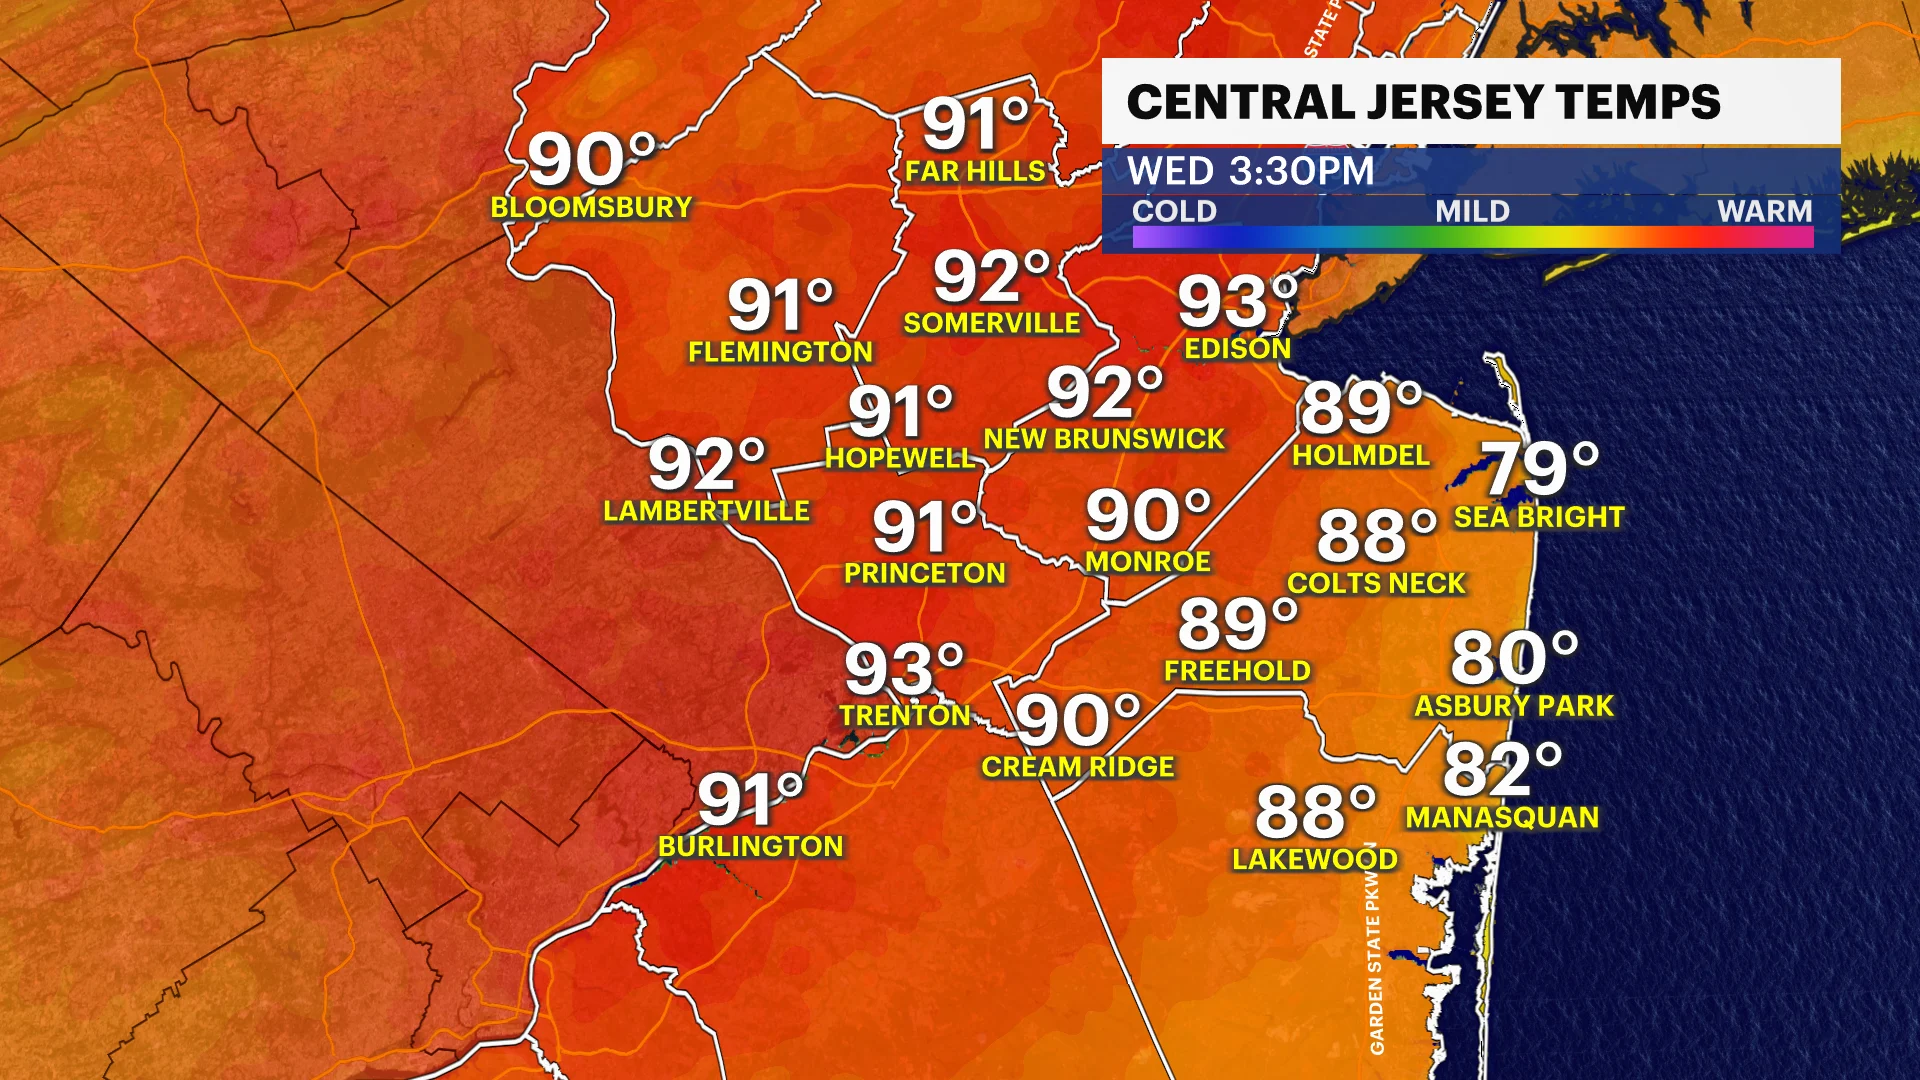 HEAT ALERT: Heat advisory in effect for New Jersey with extreme highs expected all week